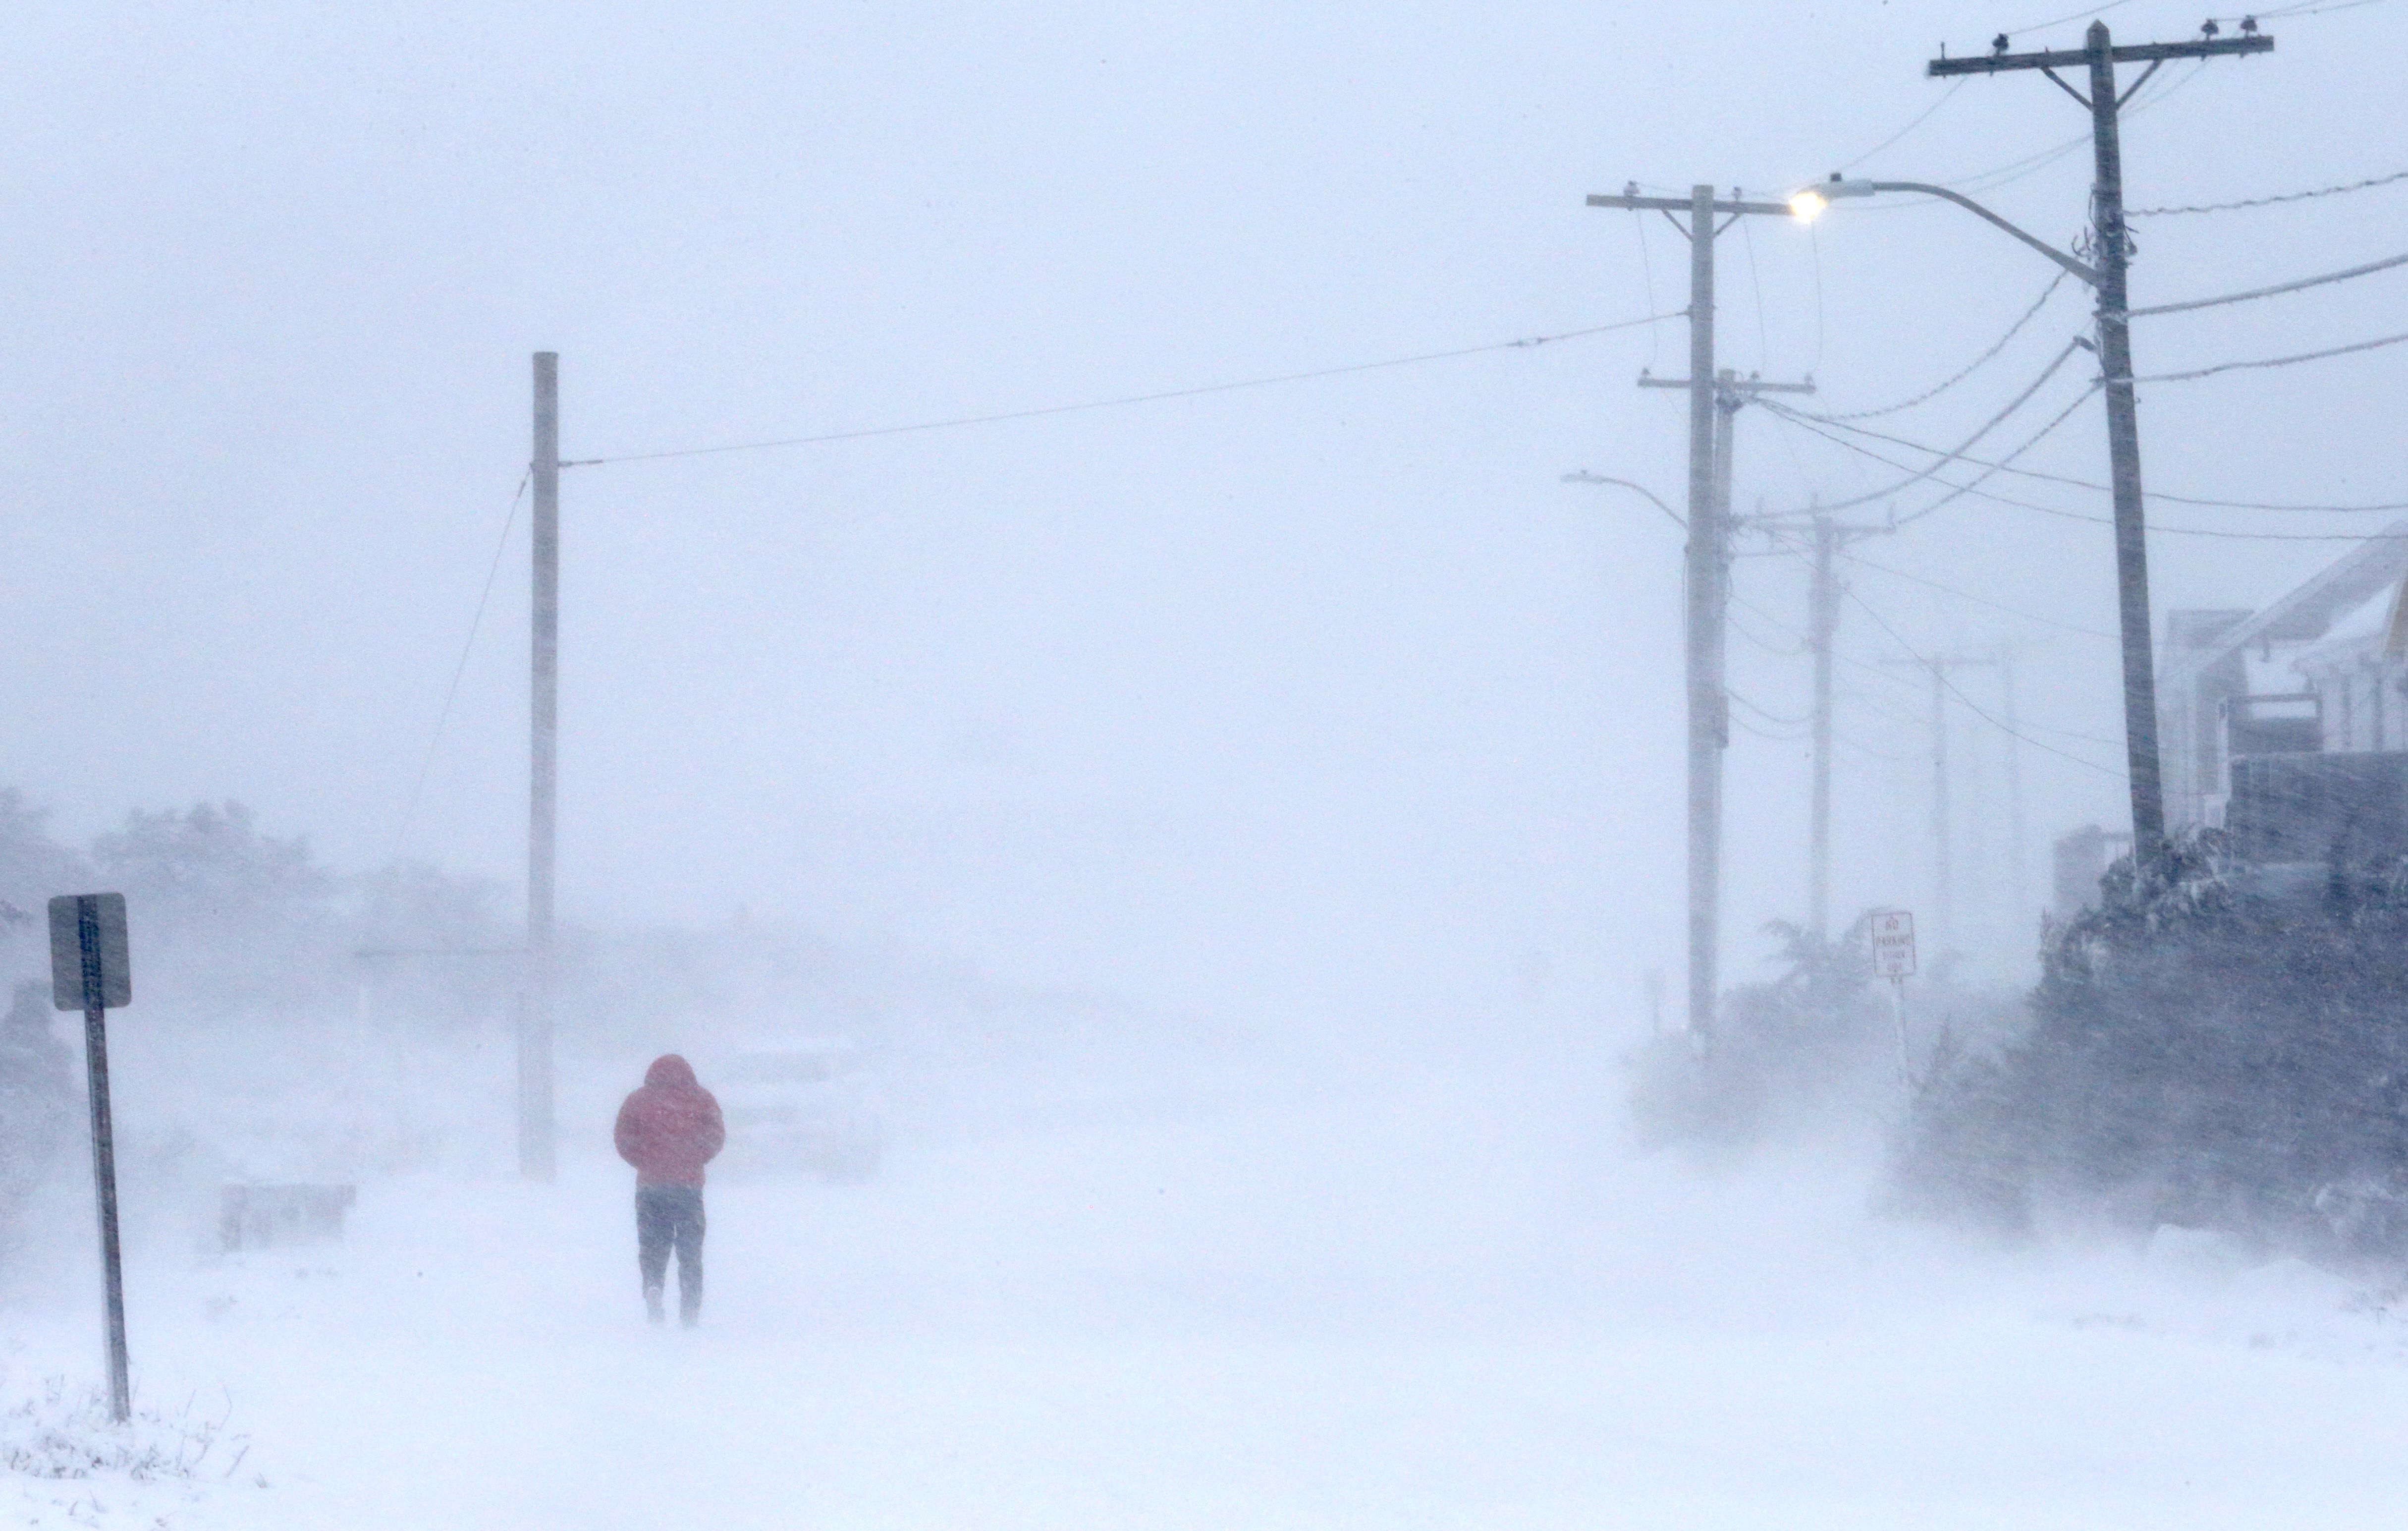 A man walks along Surf Drive in whiteout conditions during the snowstorm in Falmouth, MA on Jan. 29, 2022